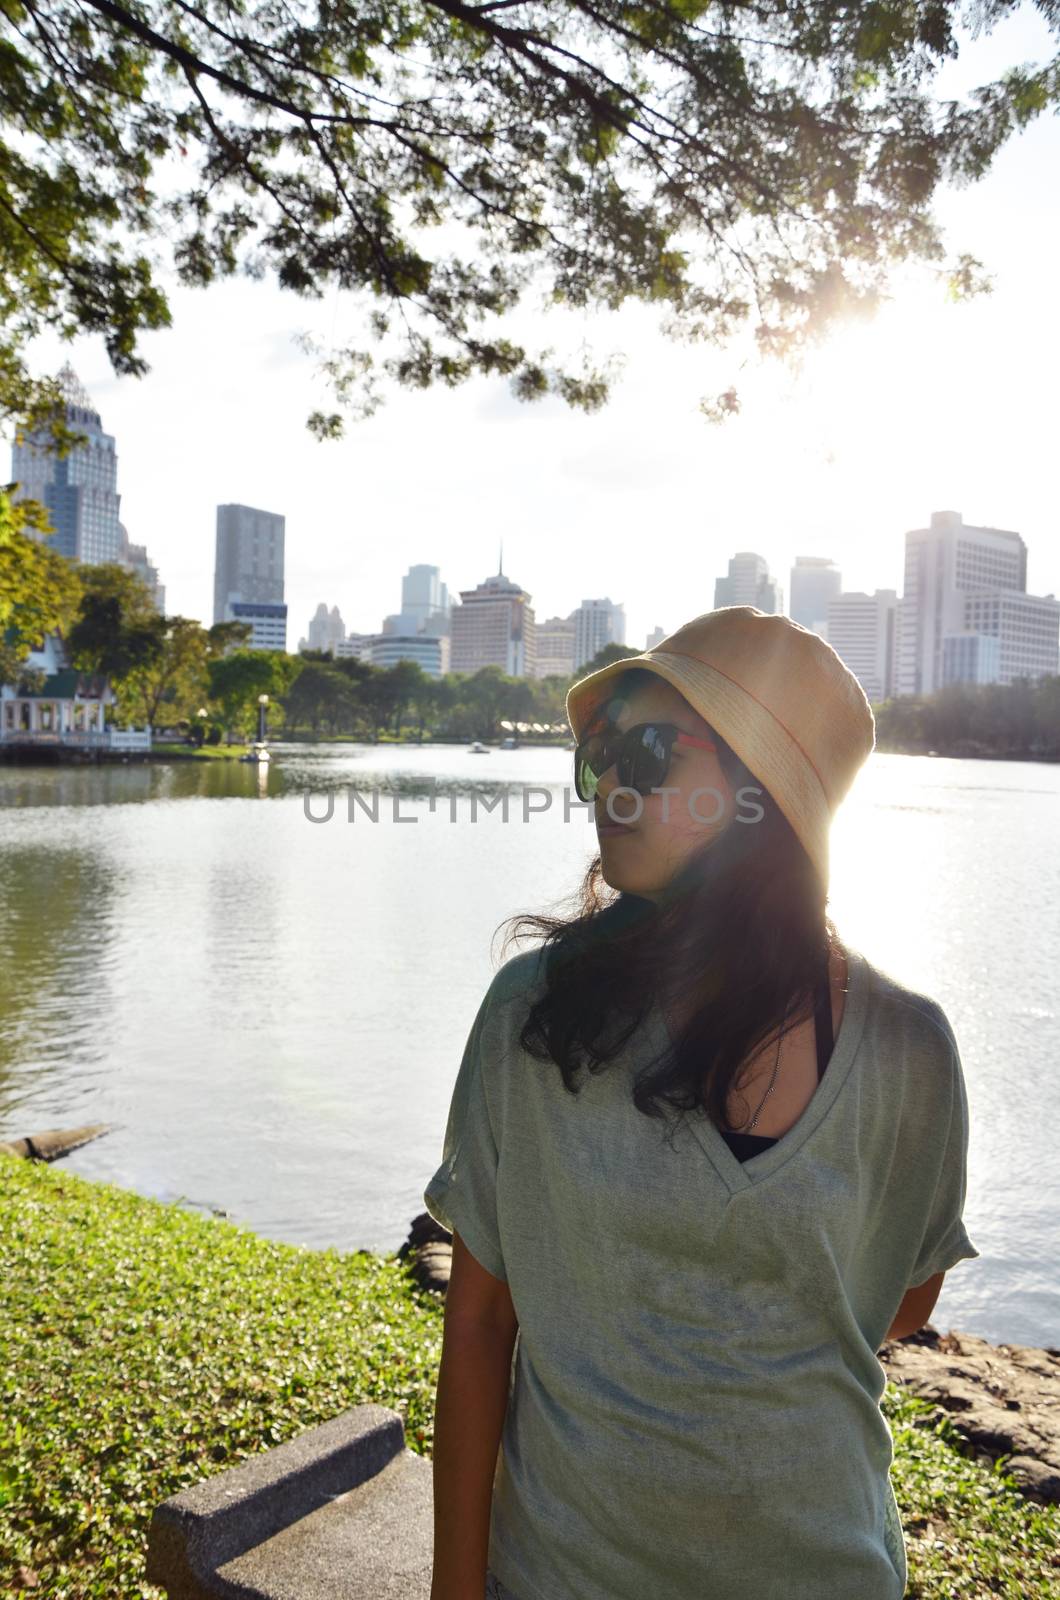 Fashion girl at public park, sunset time by siraanamwong